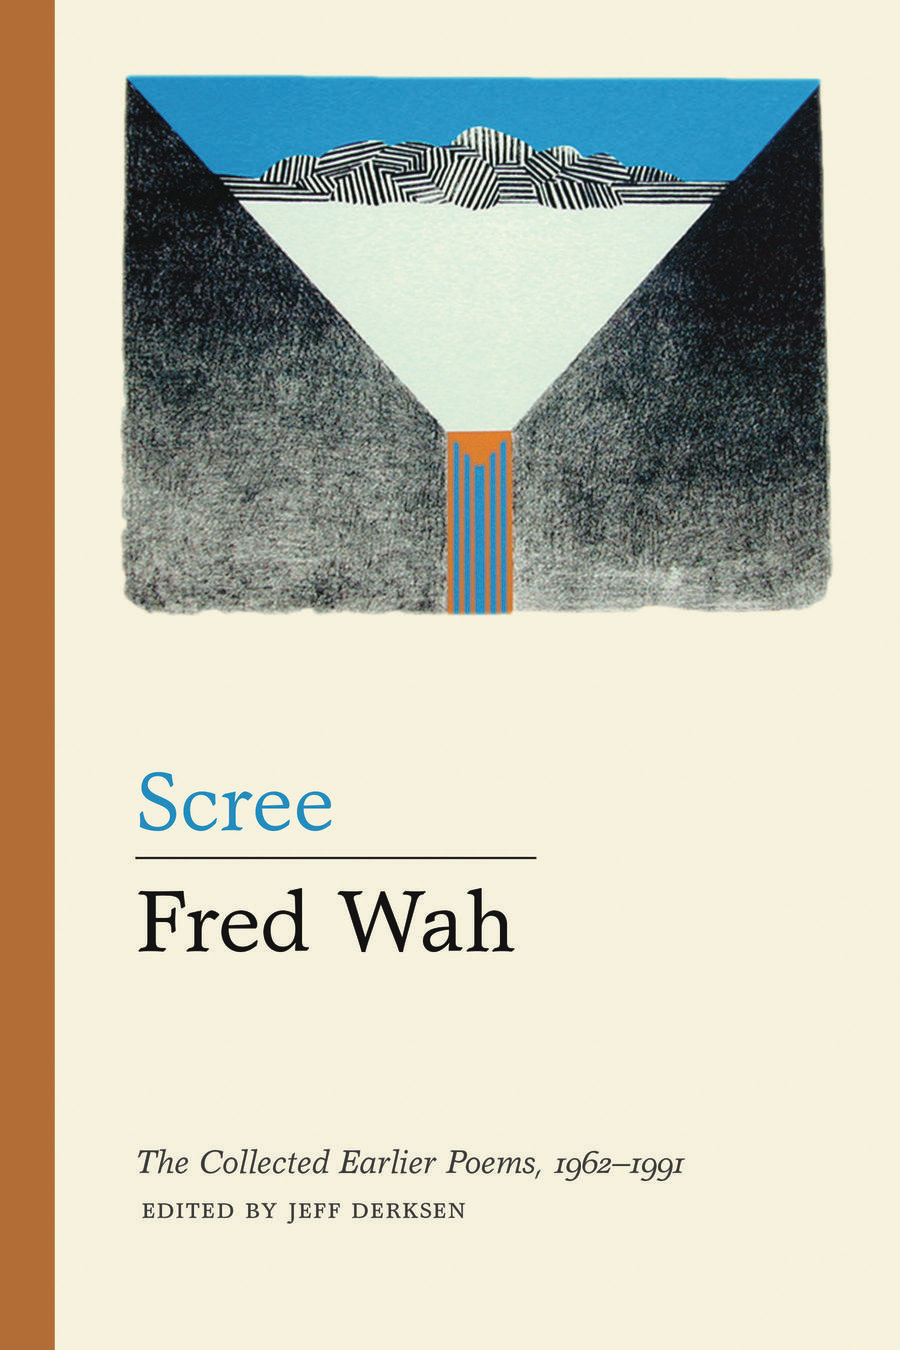 Scree: The Collected Earlier Poems of Fred Wah